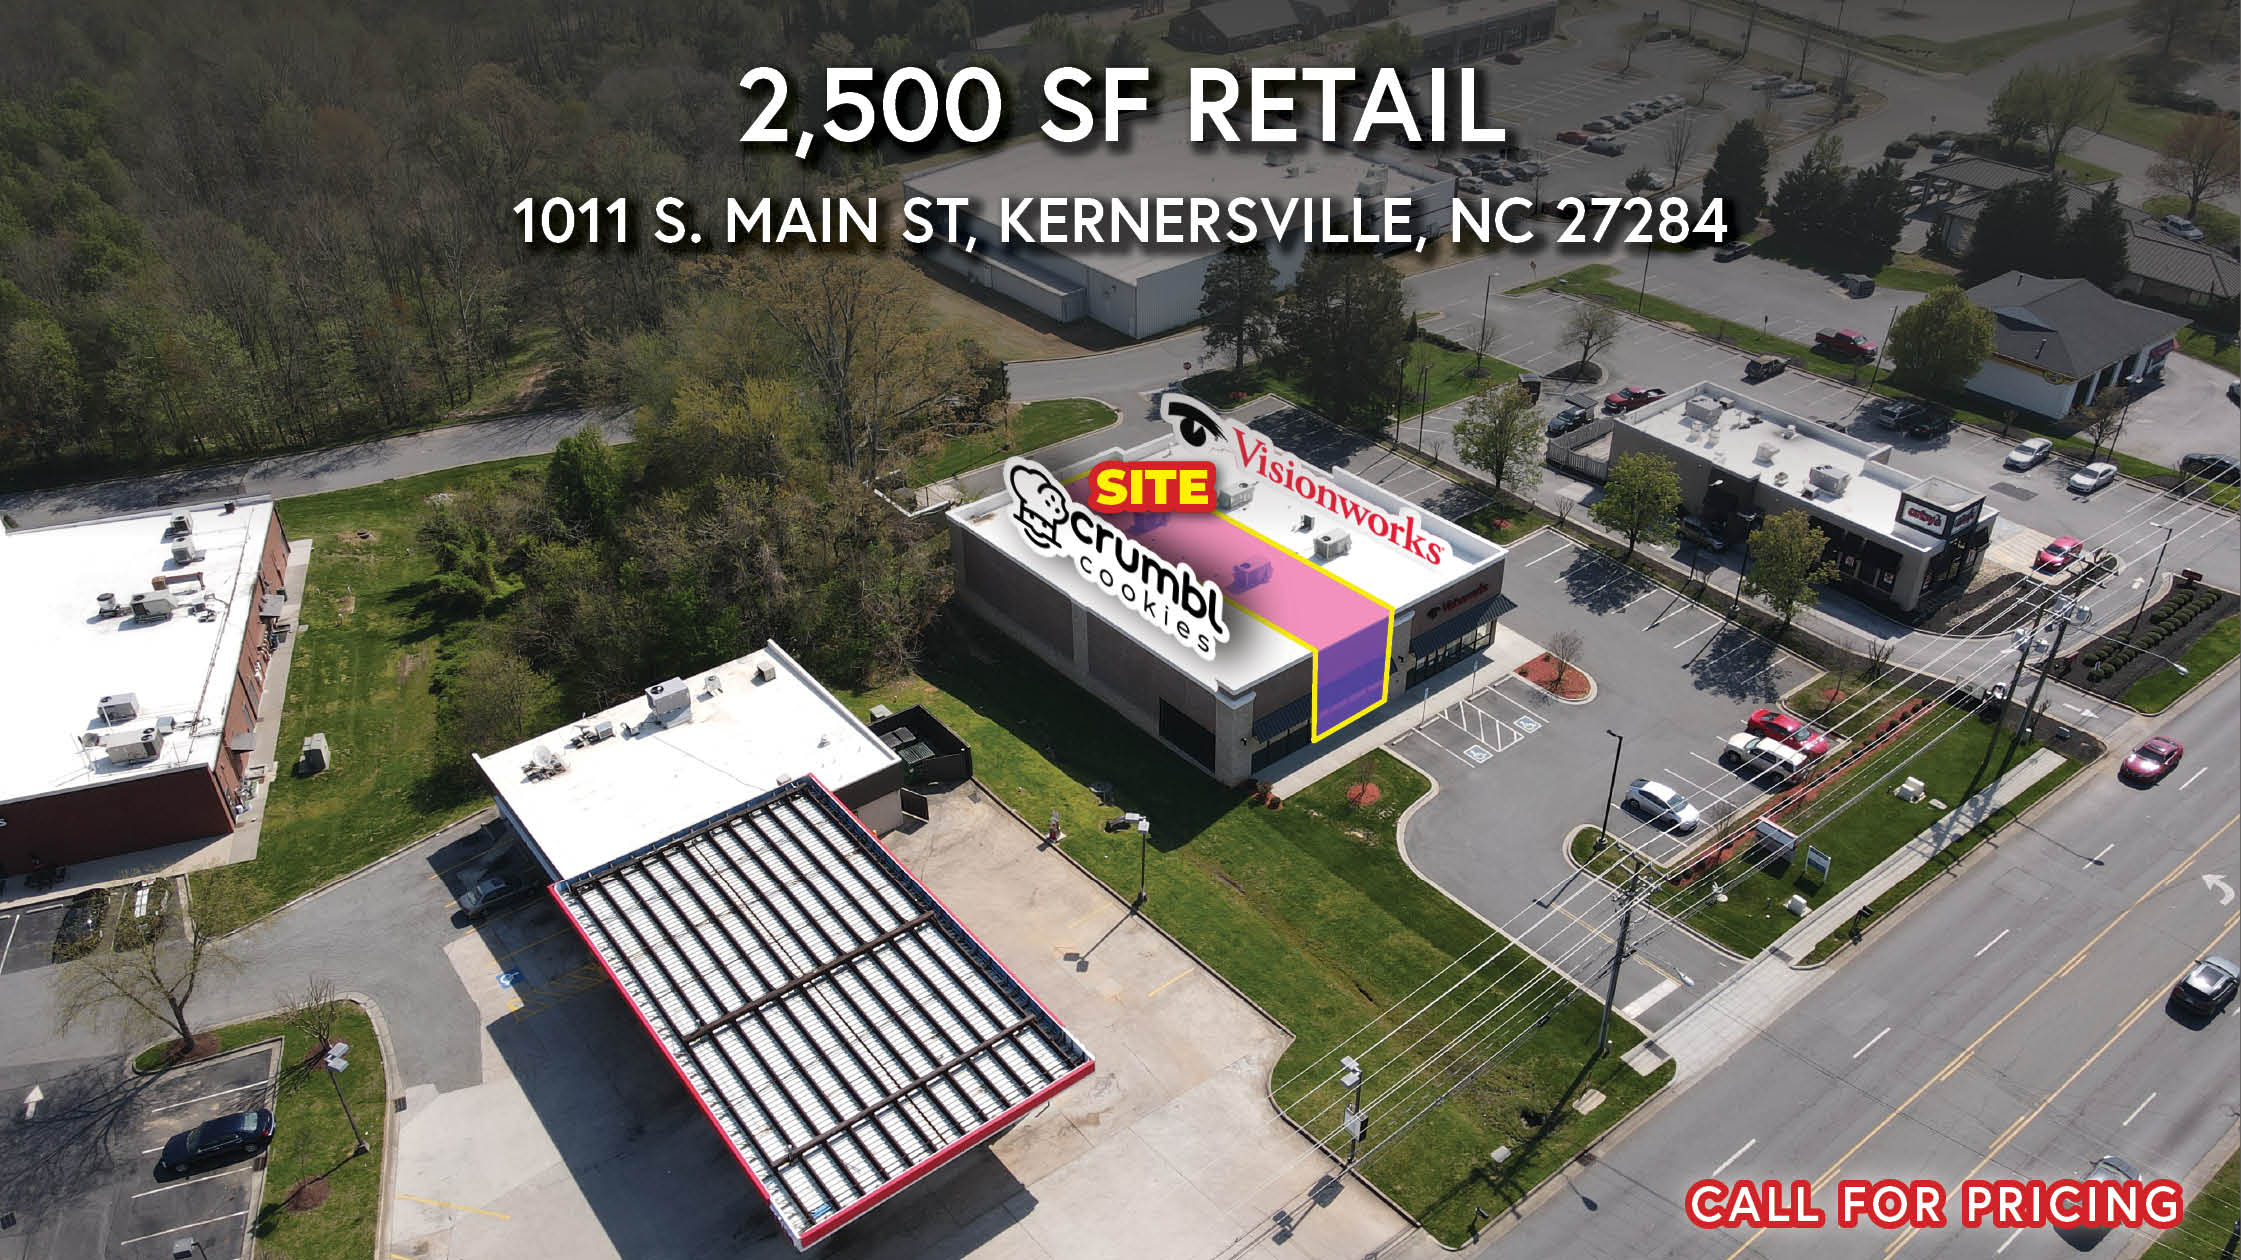 Kernersville, inline, in-line, retail, available, 2,500 SF, square feet, 2500, crumbl, cookies, crumbl cookies, crumble, crumble cookies, vision works, visionworks, vision, works,